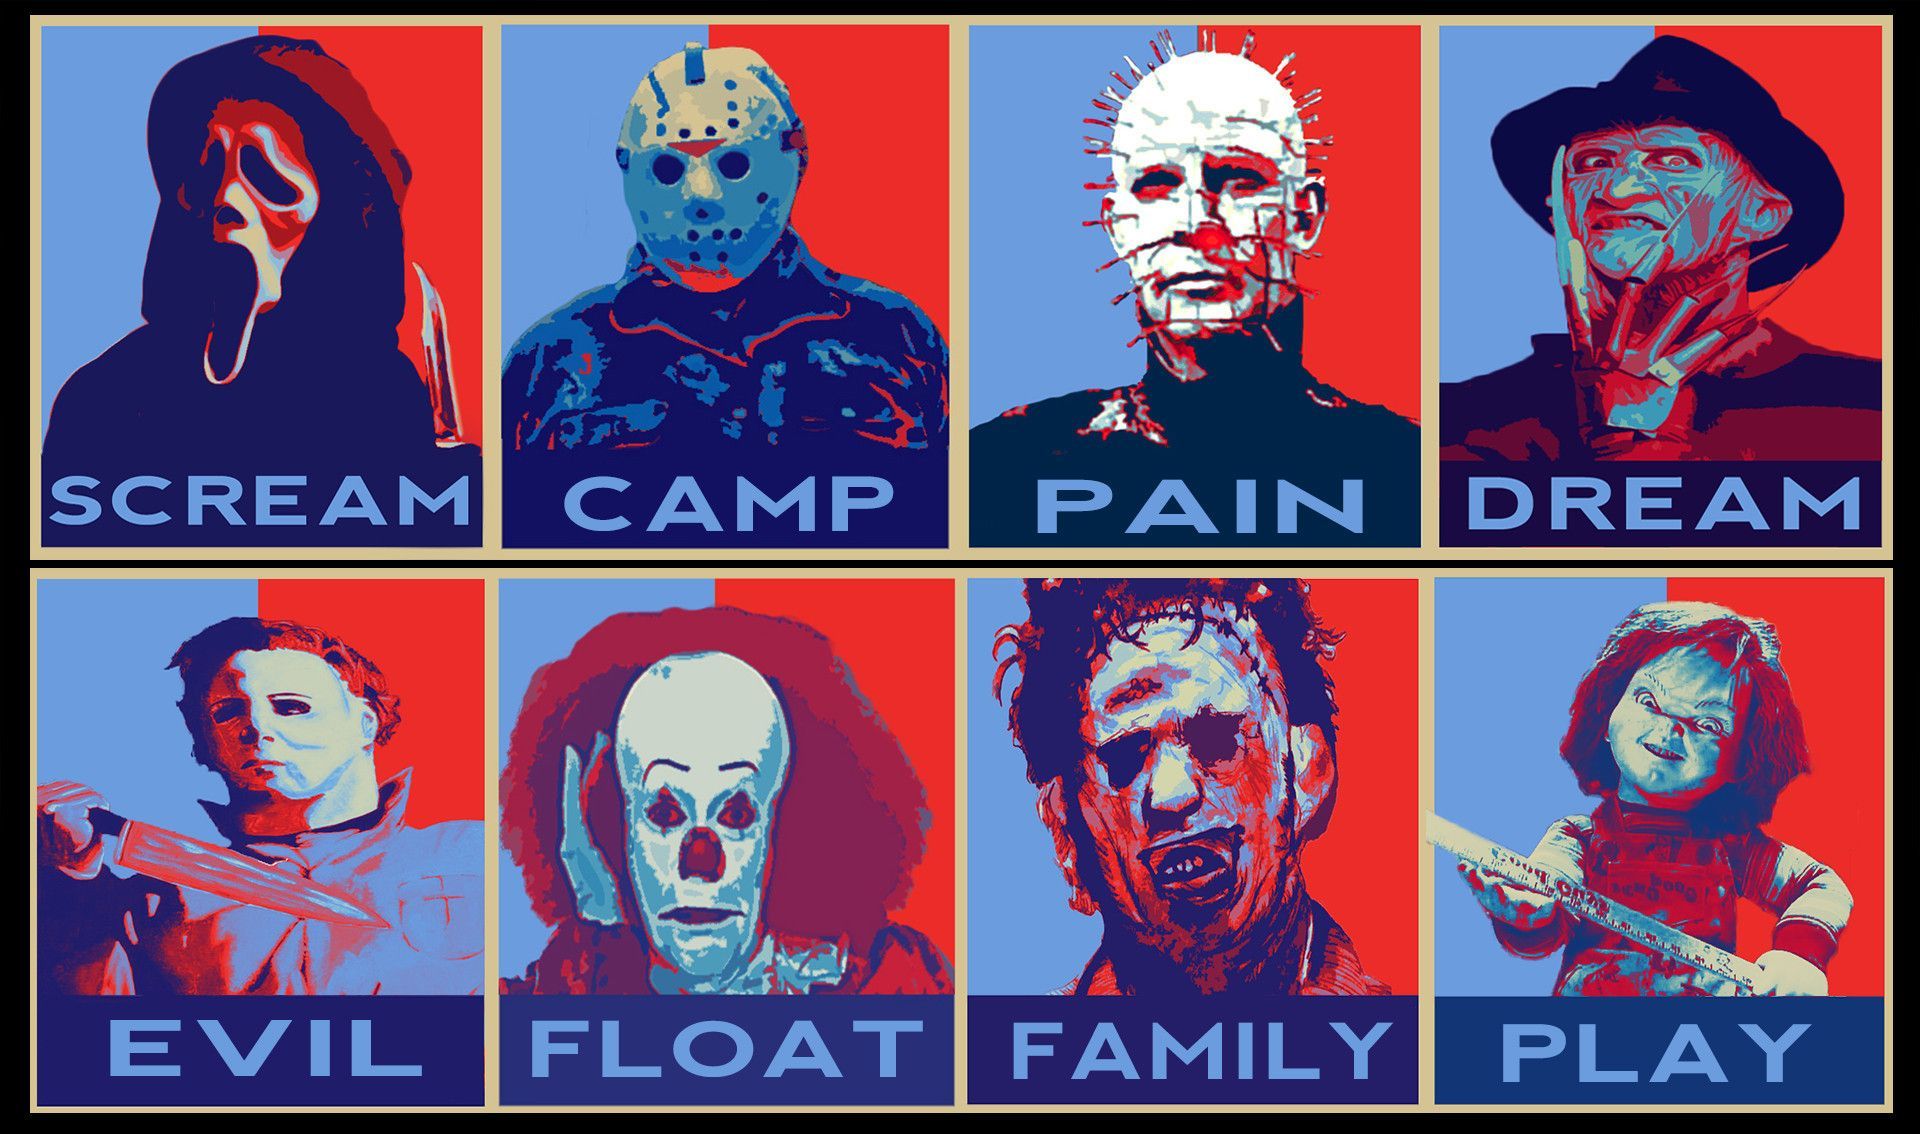 A red and blue graphic with the words Scream Camp Pain Dream and images of horror movie characters - Horror